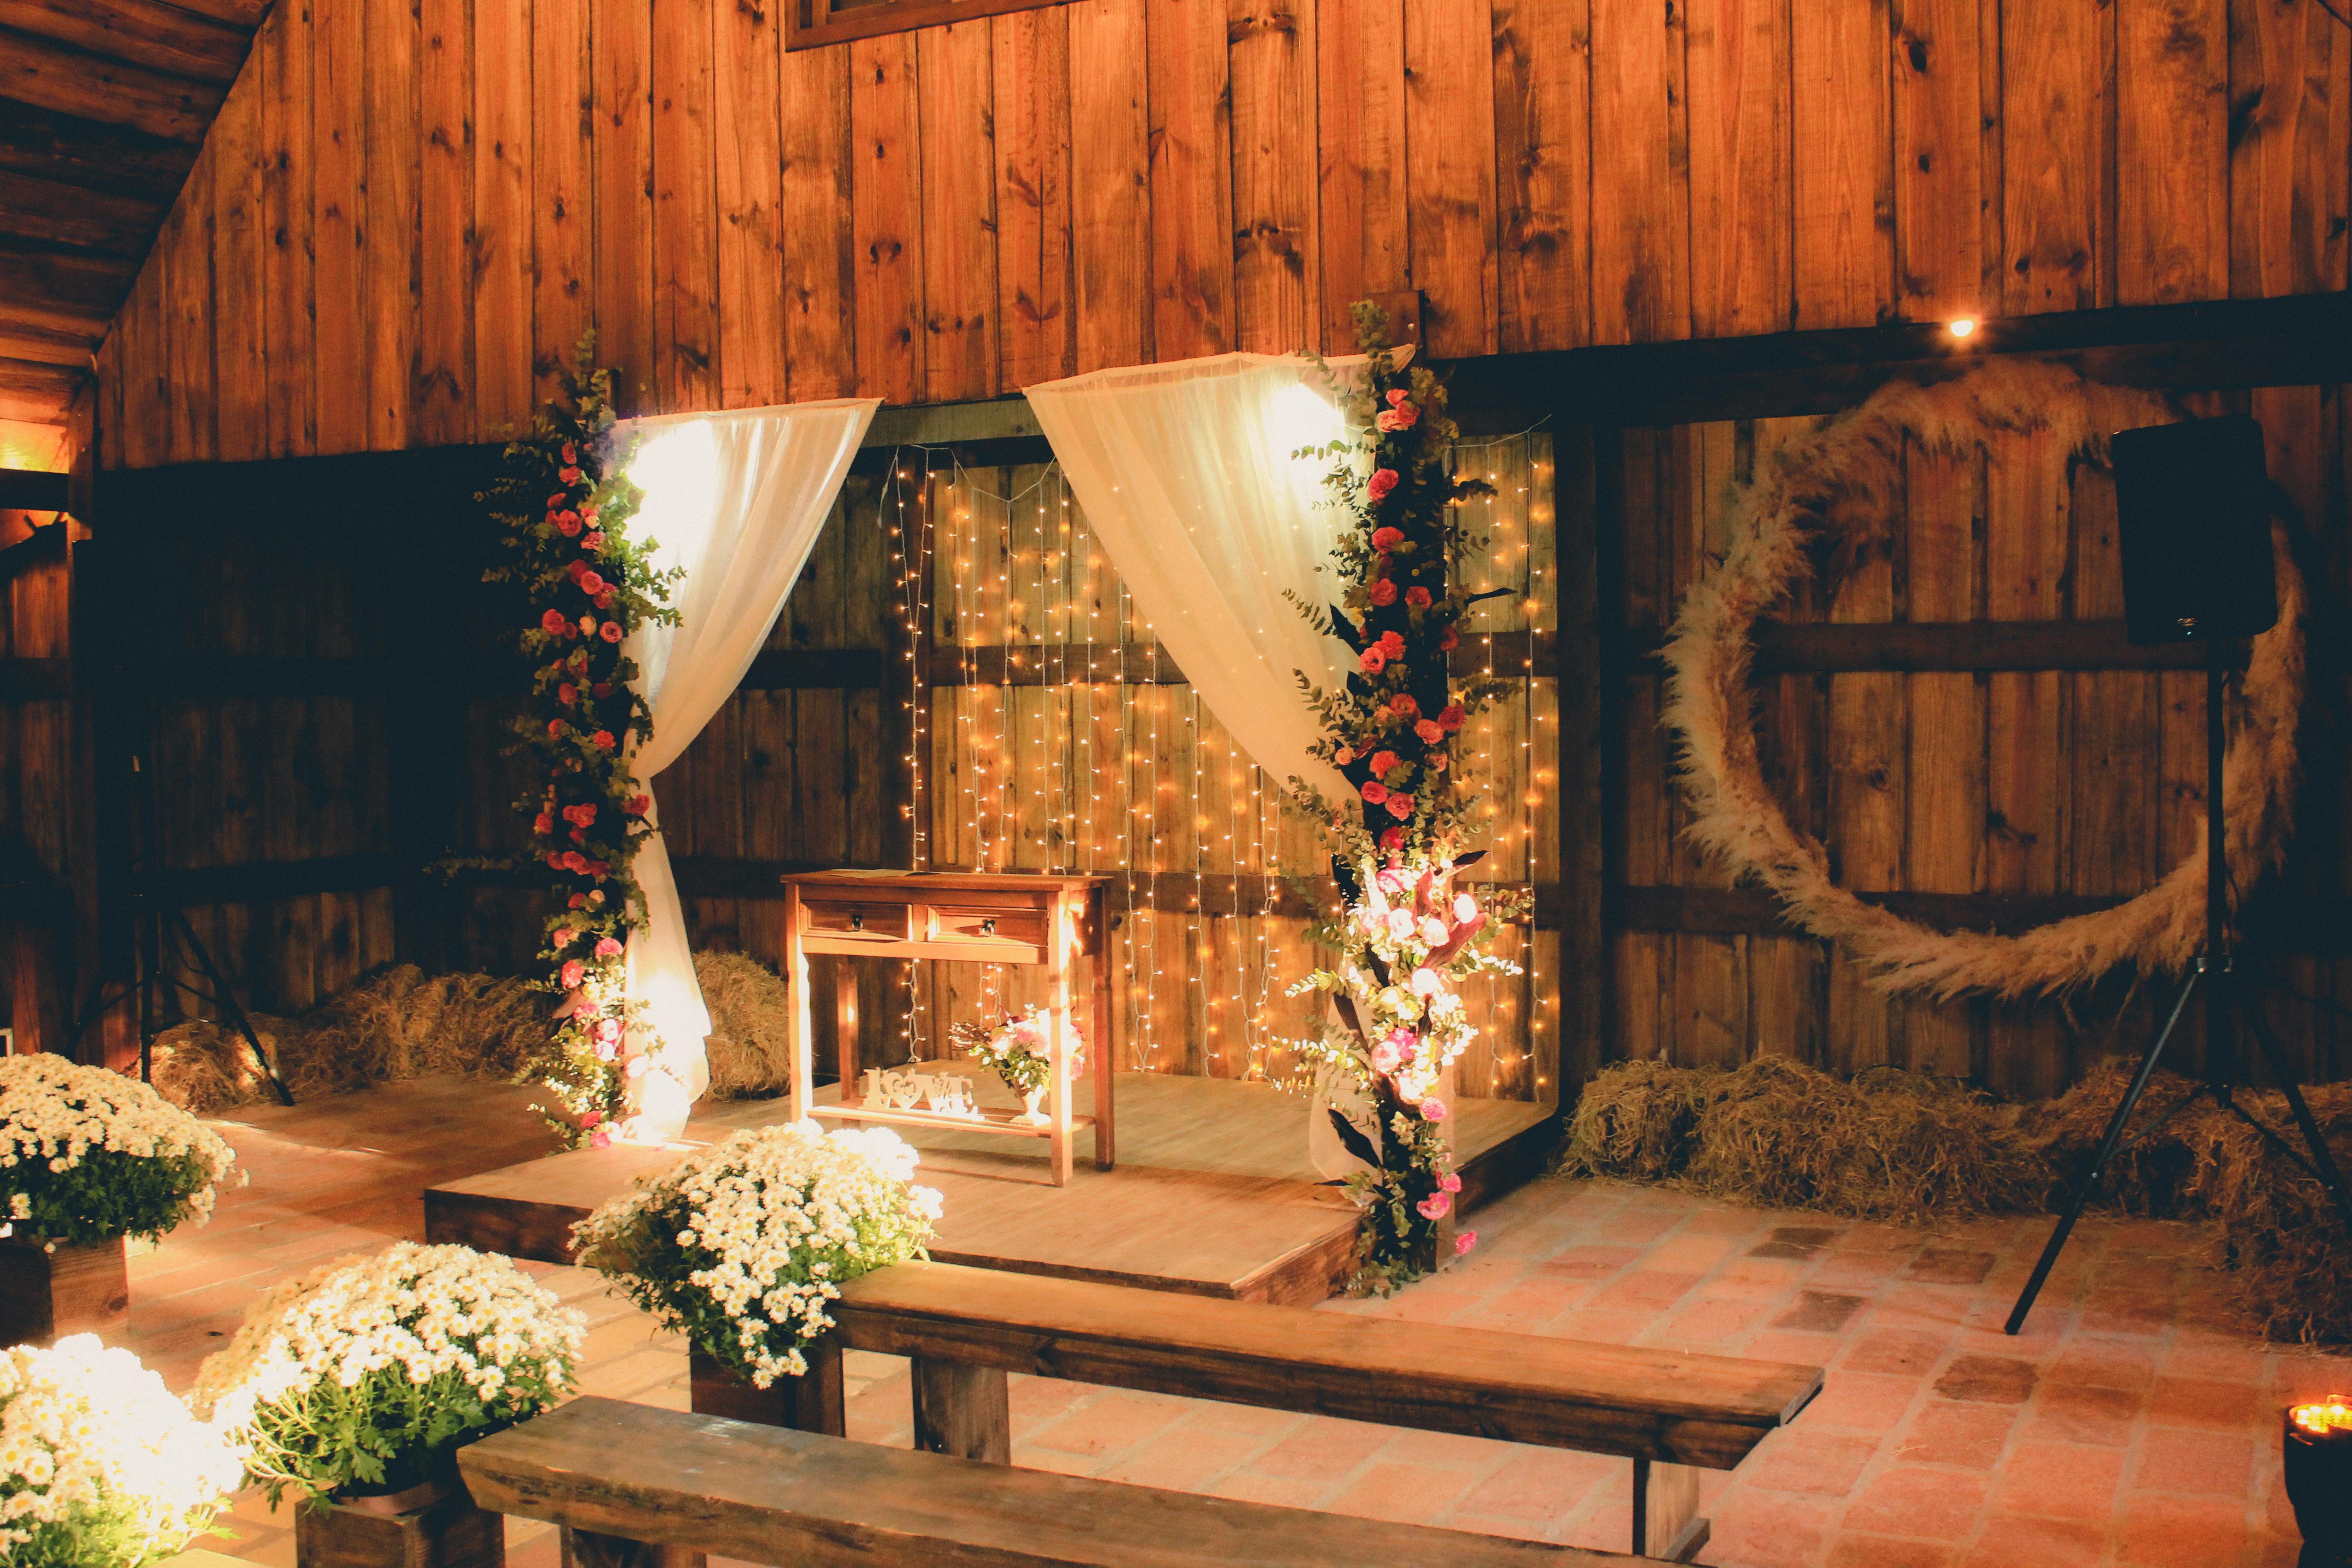 Stage decorated with curtains, glowing garlands and flowers in a wooden building